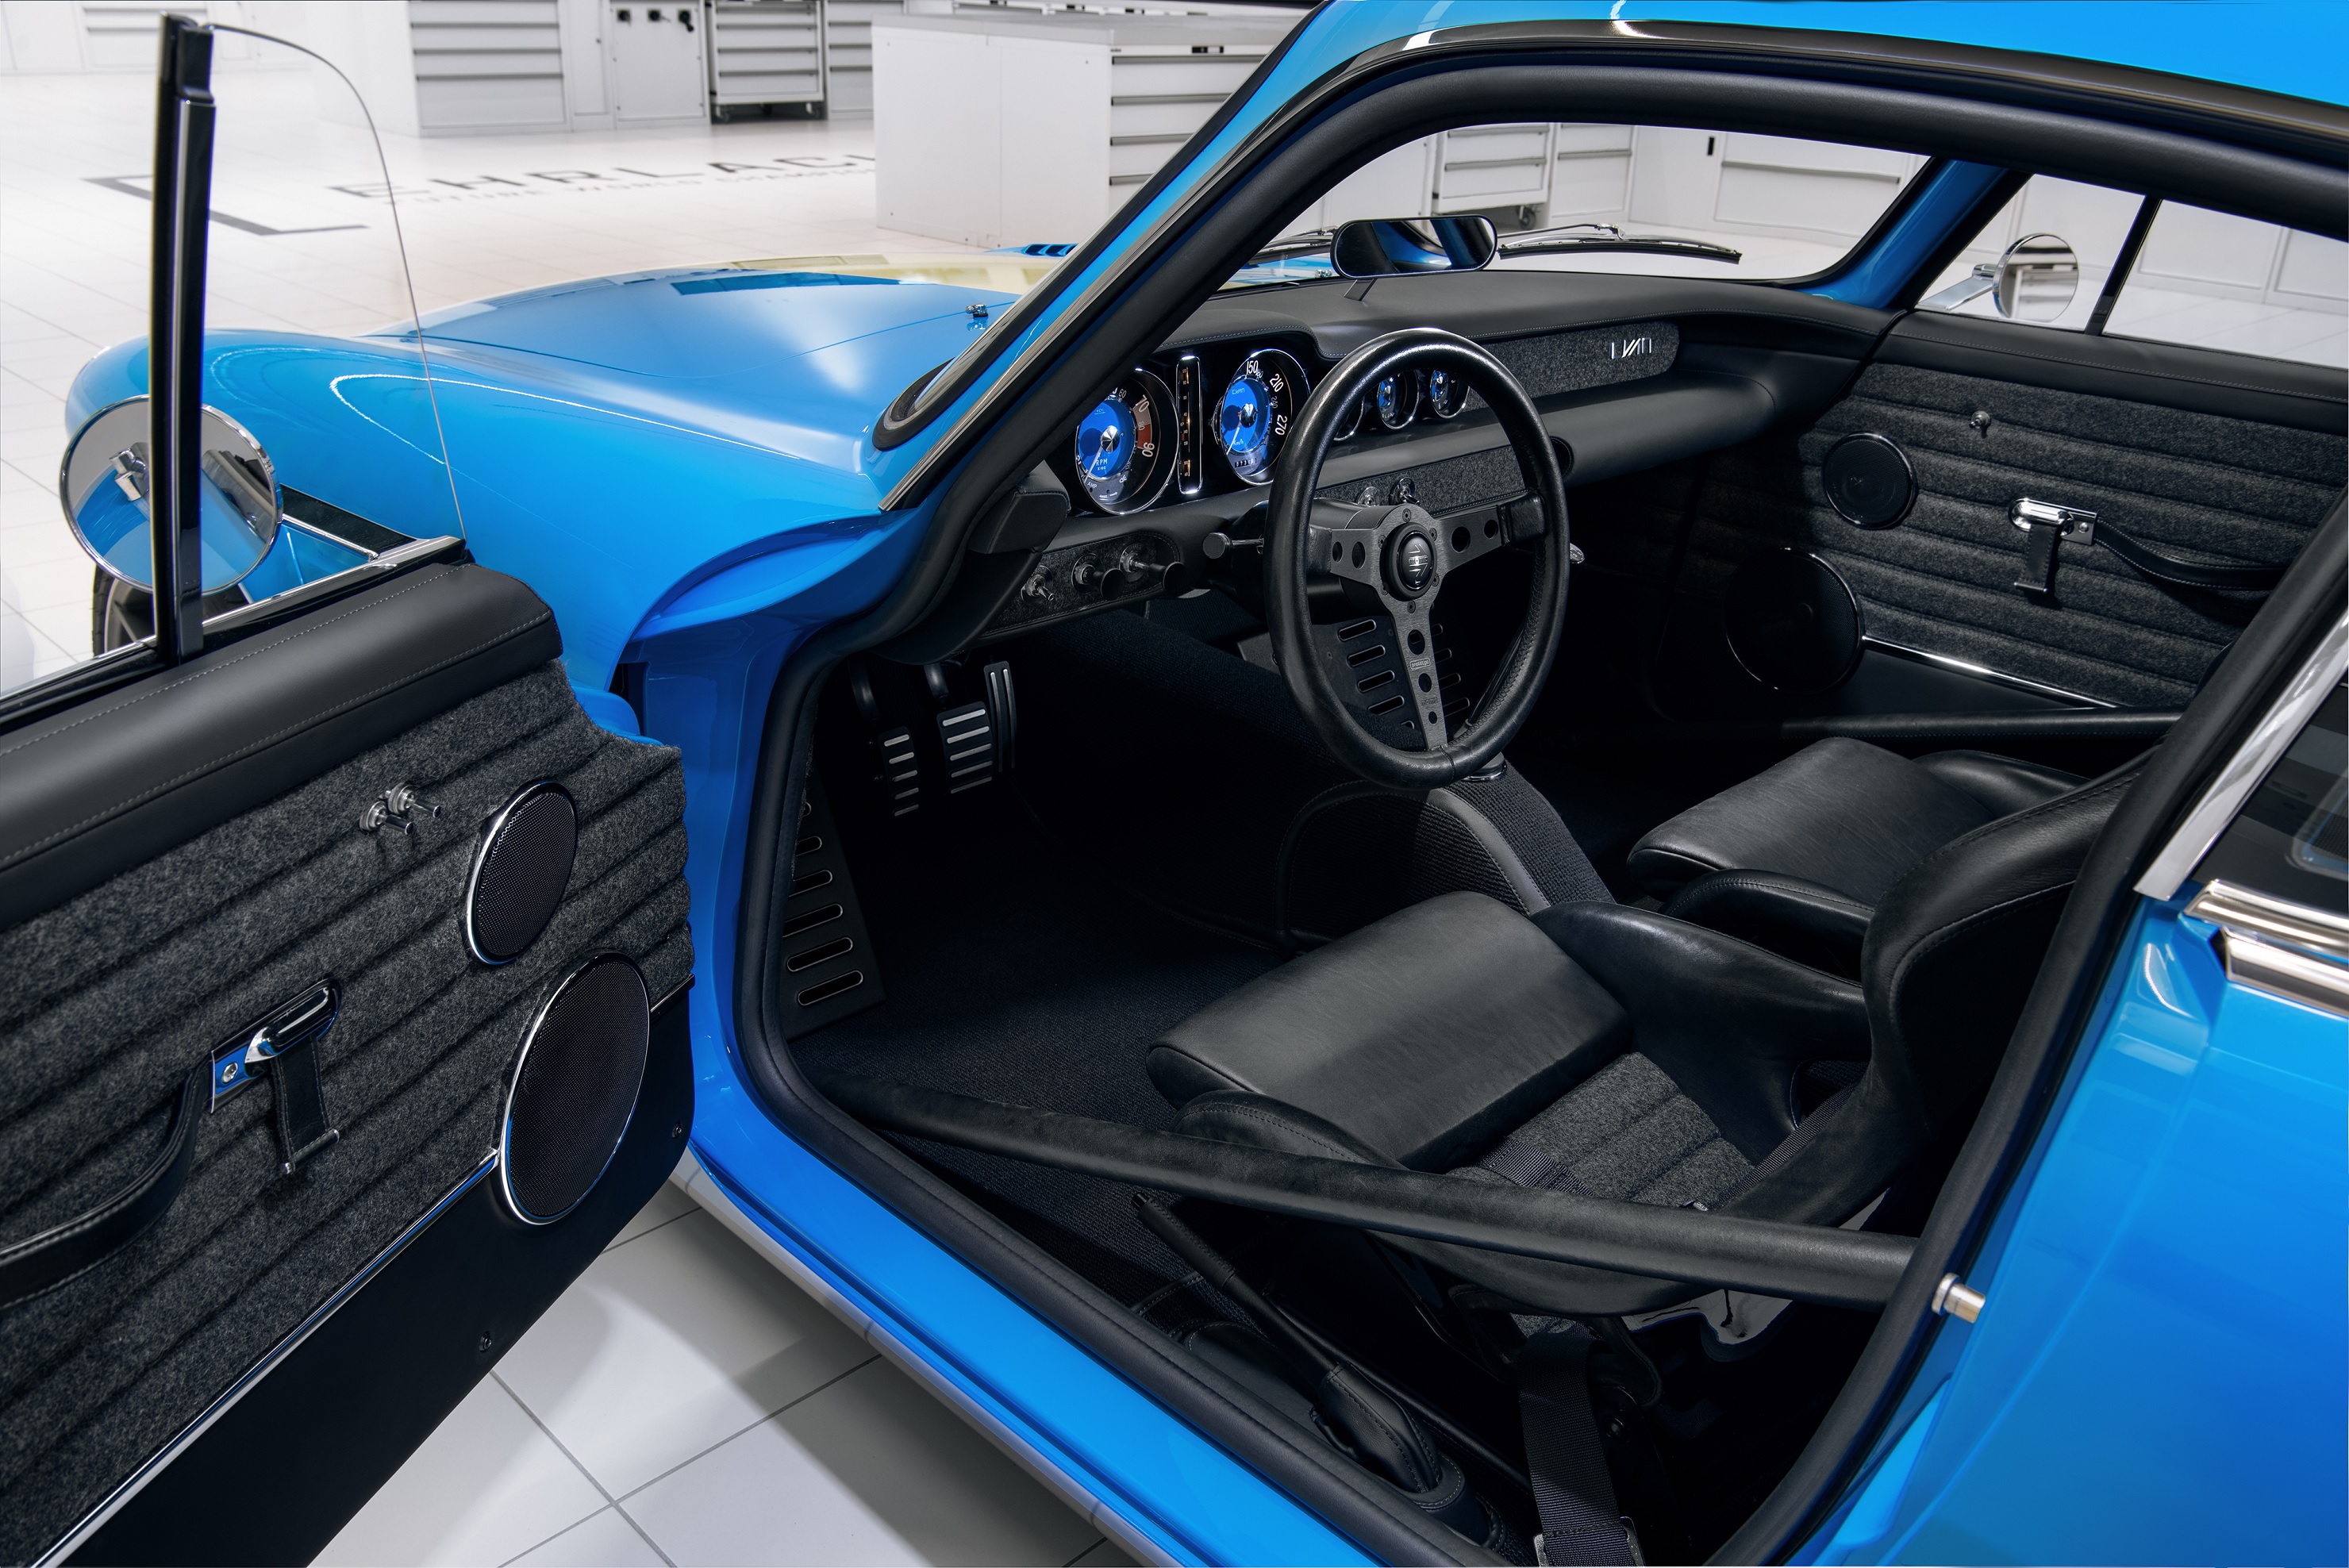 The black Recaro seats, roll cage, and dashboard of a blue Volvo P1800 Cyan in a white garage